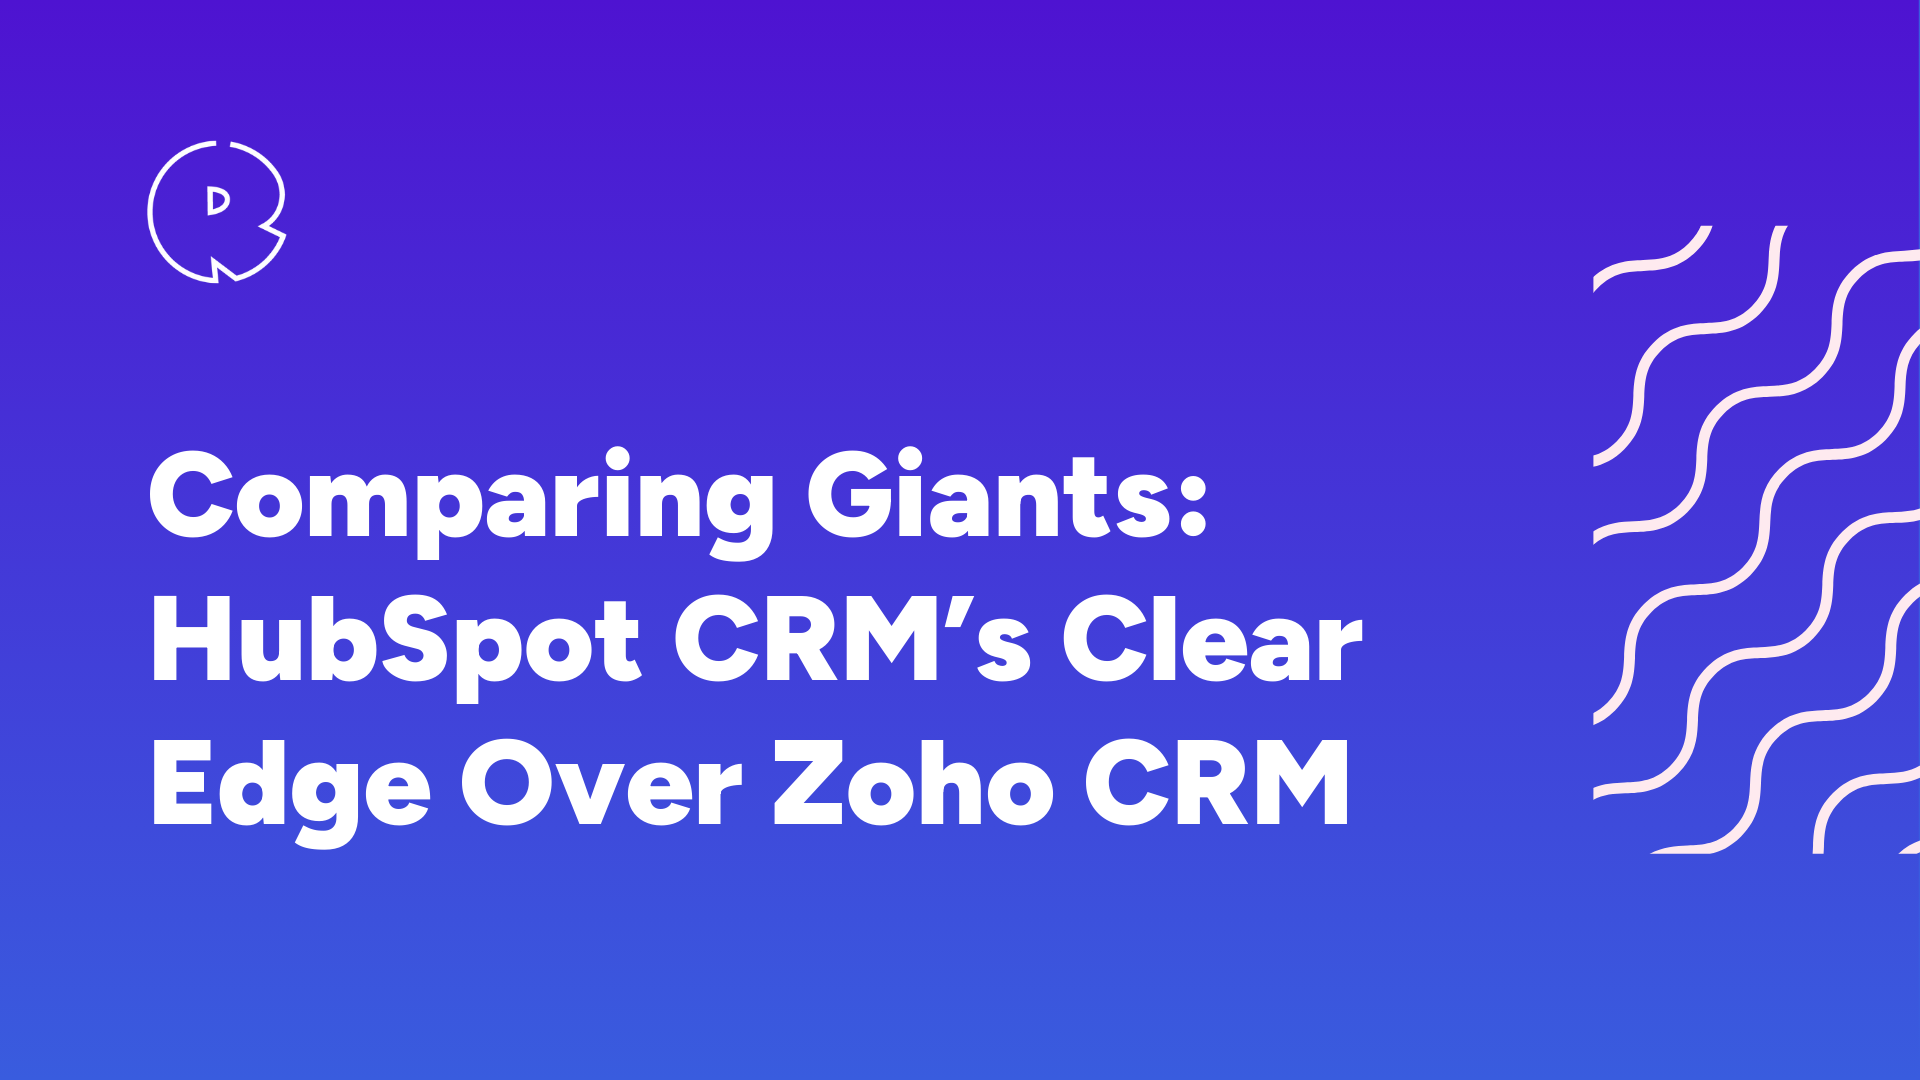 Comparing Giants: HubSpot CRM’s Clear Edge Over Zoho CRM